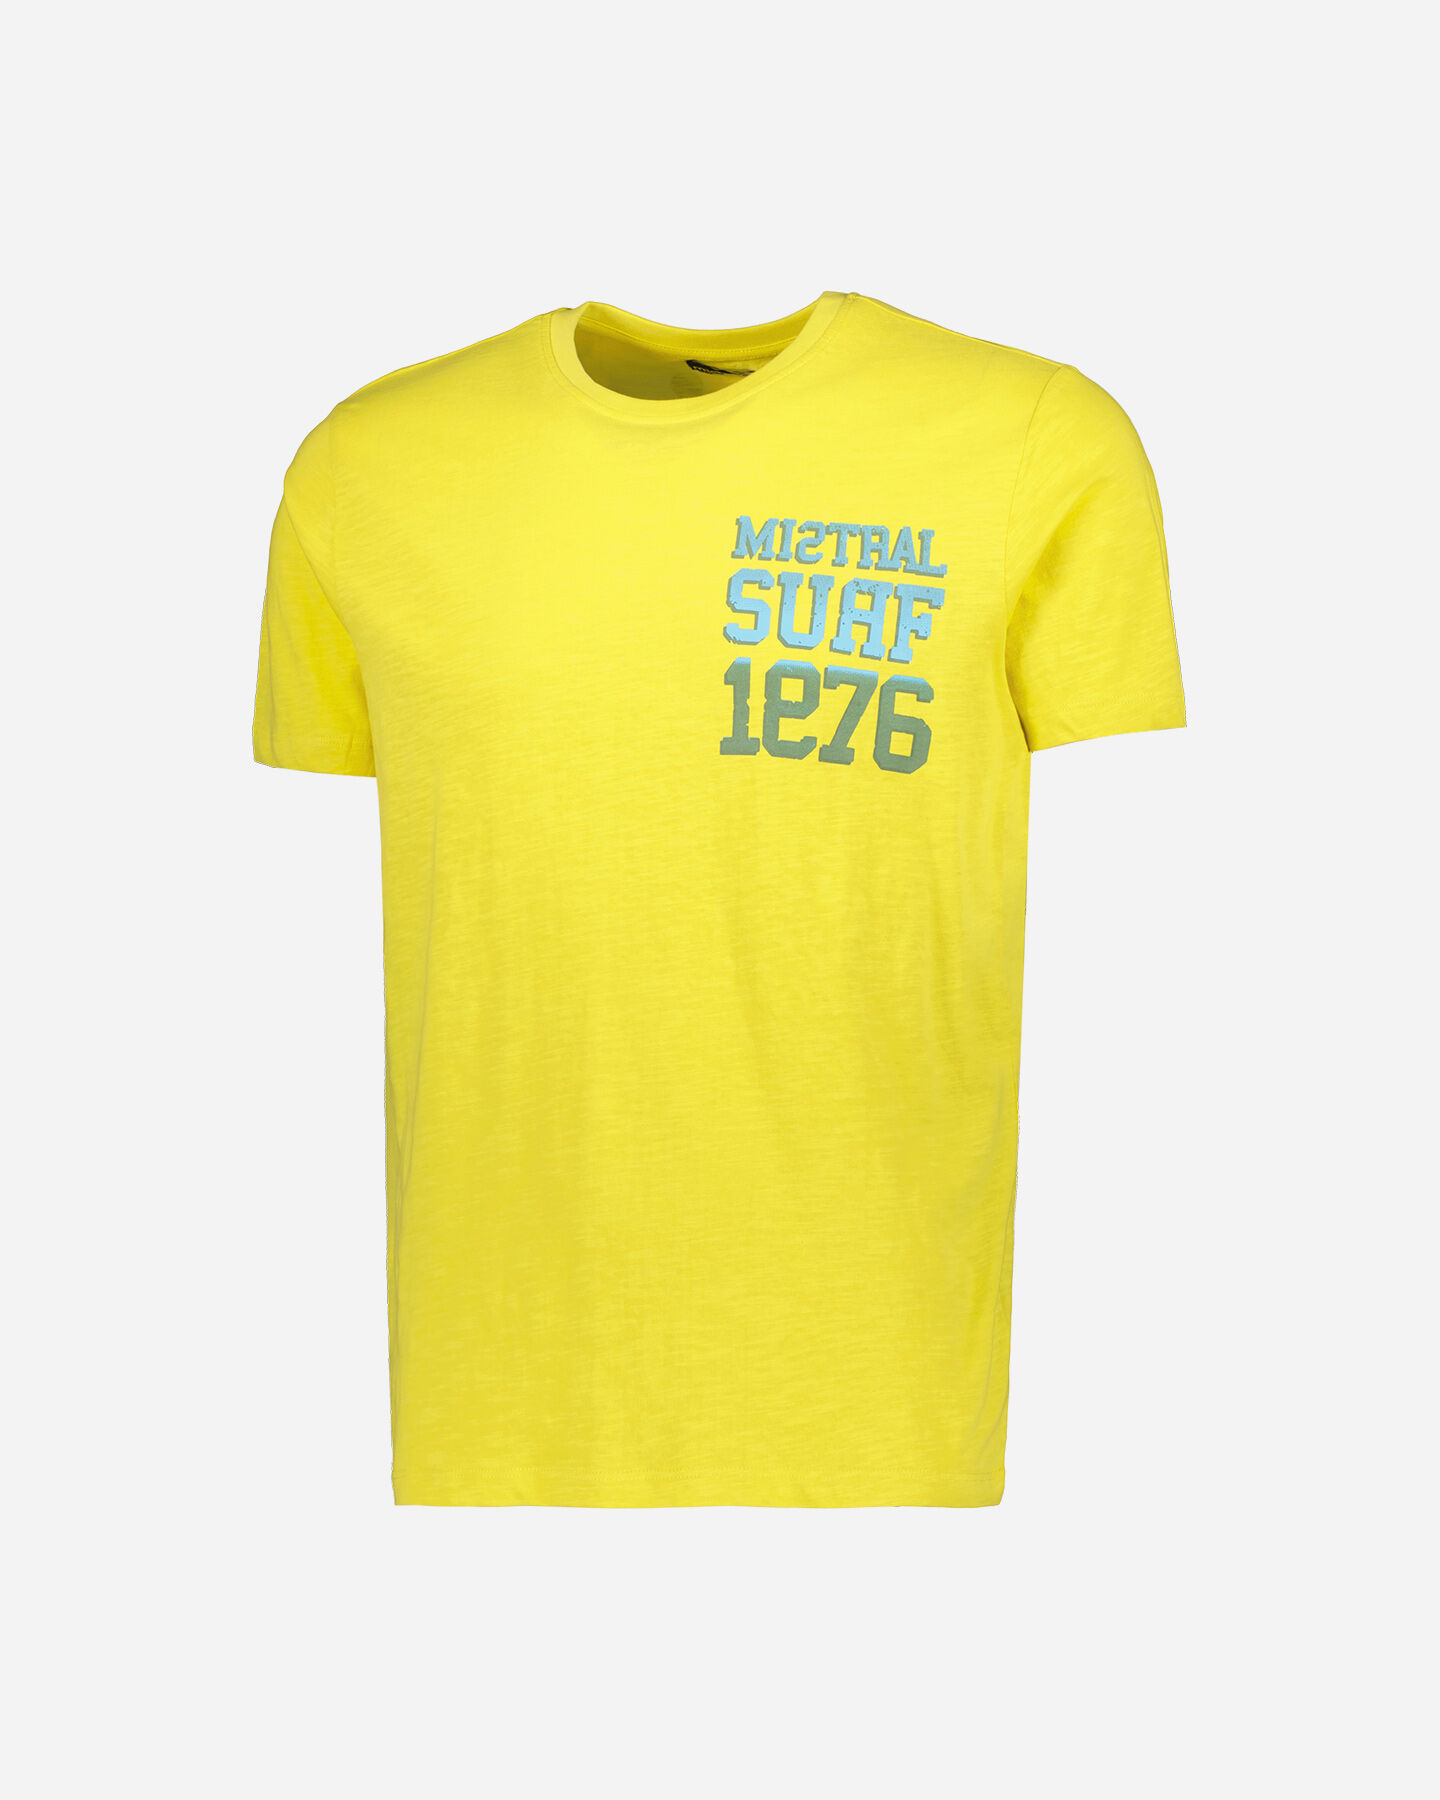  T-Shirt MISTRAL SURF 1976 M S4102910 scatto 5